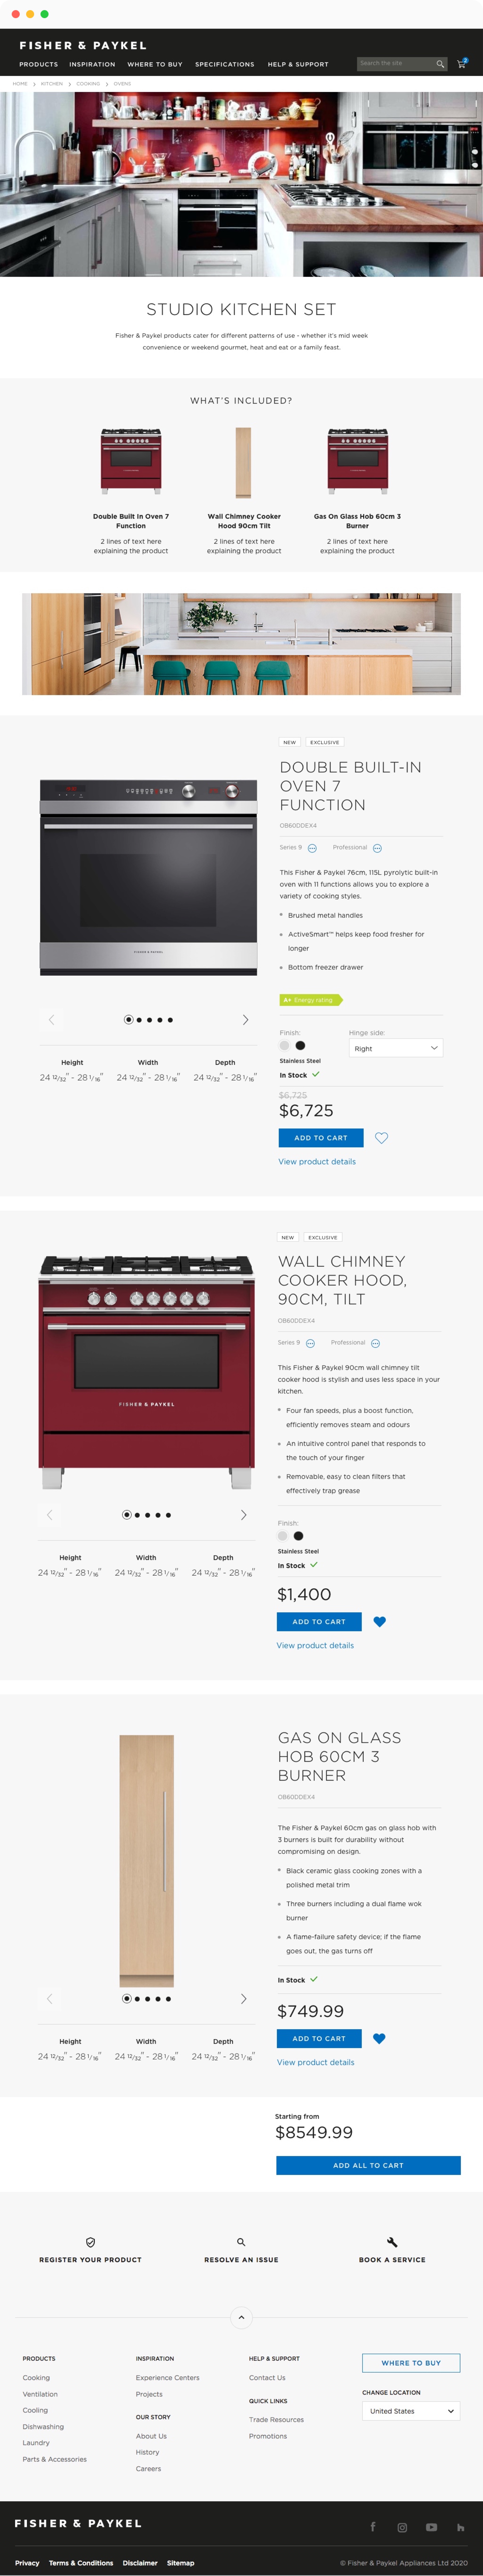 Fisher Paykel homepage design